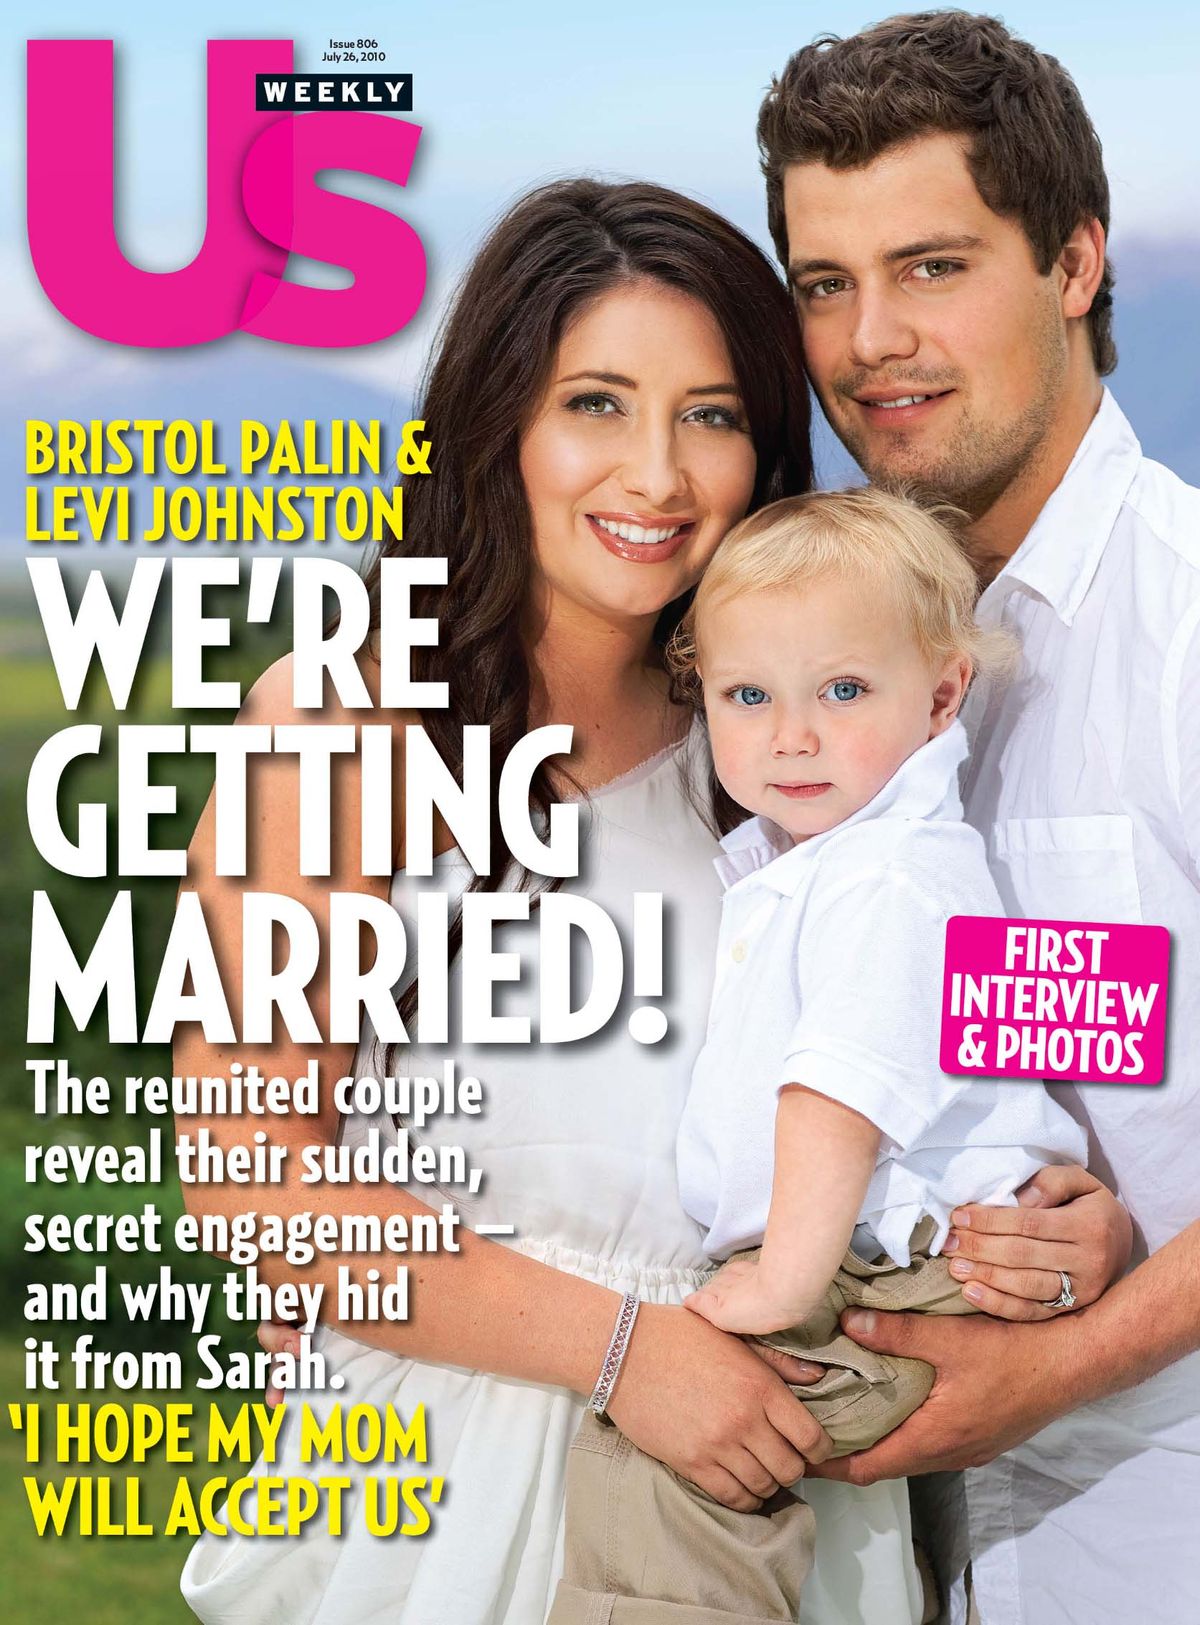 Bristol Palin, Levi Johnston, and son Tripp on the cover of US Weekly.